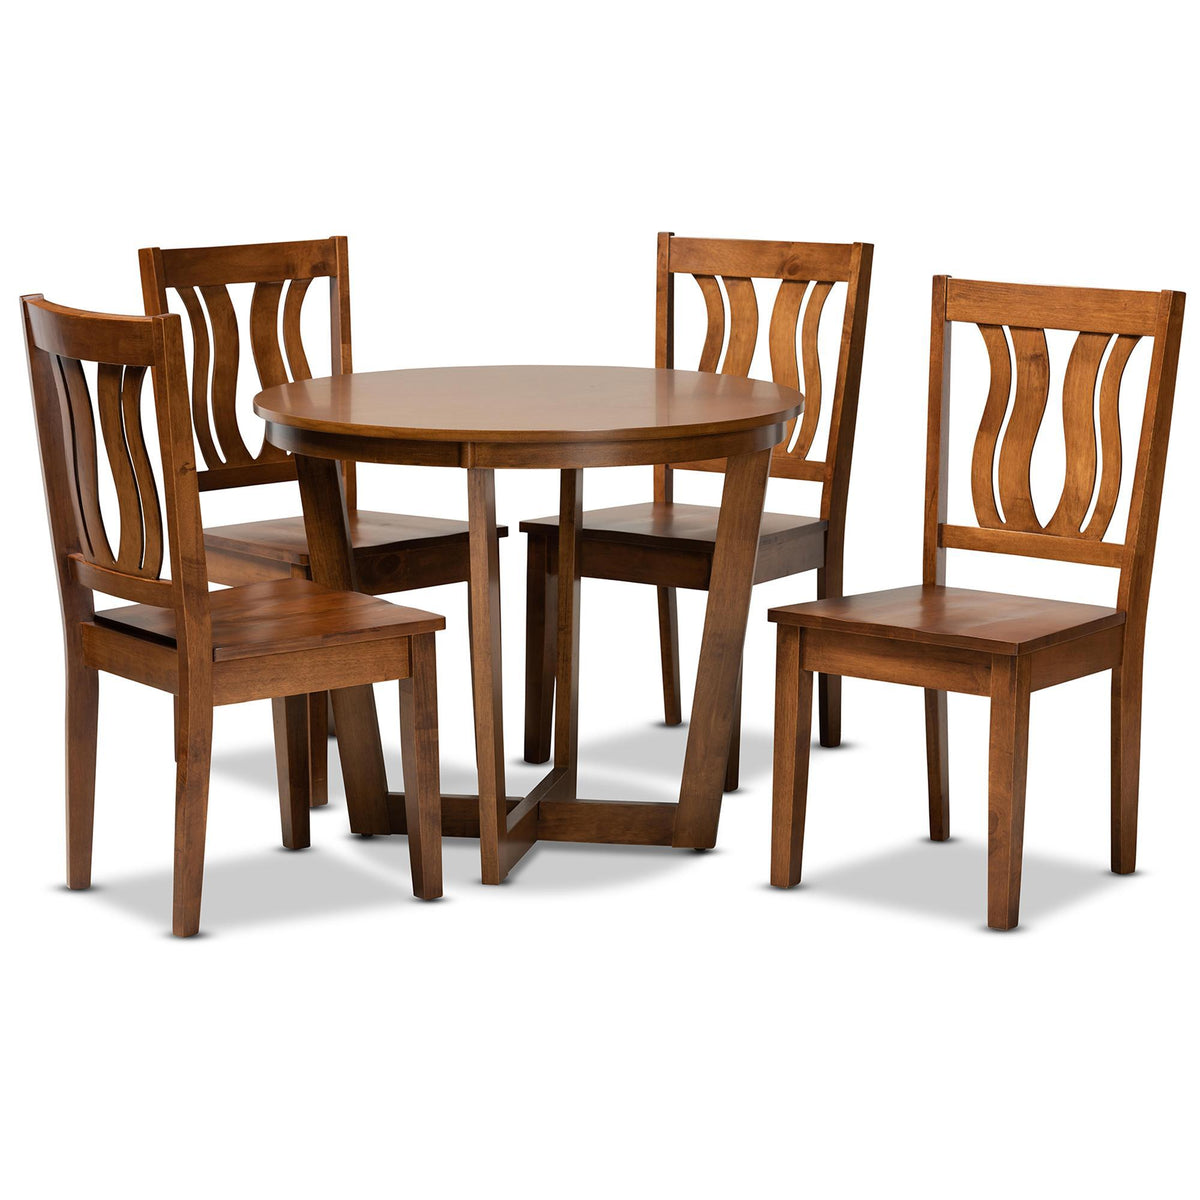 Baxton Studio Elodia Modern And Contemporary Transitional Walnut Brown Finished Wood 5-Piece Dining Set - Elodia-Walnut-5PC Dining Set